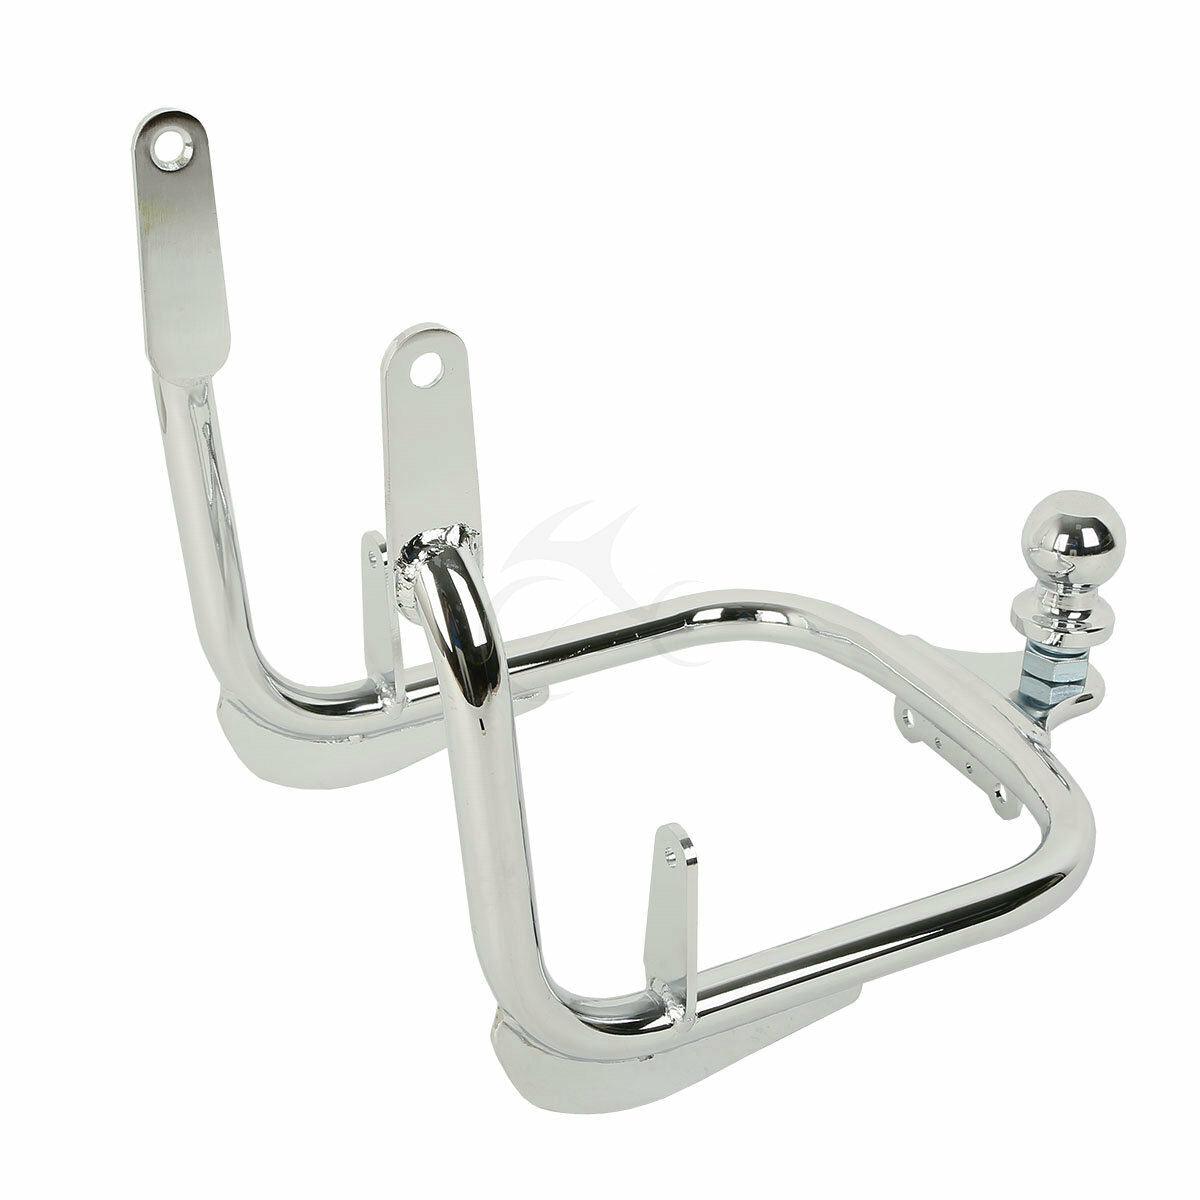 Chrome Trailer Hitch Tow Fit For Harley Touring Electra Street Glide 2009-2013 - Moto Life Products